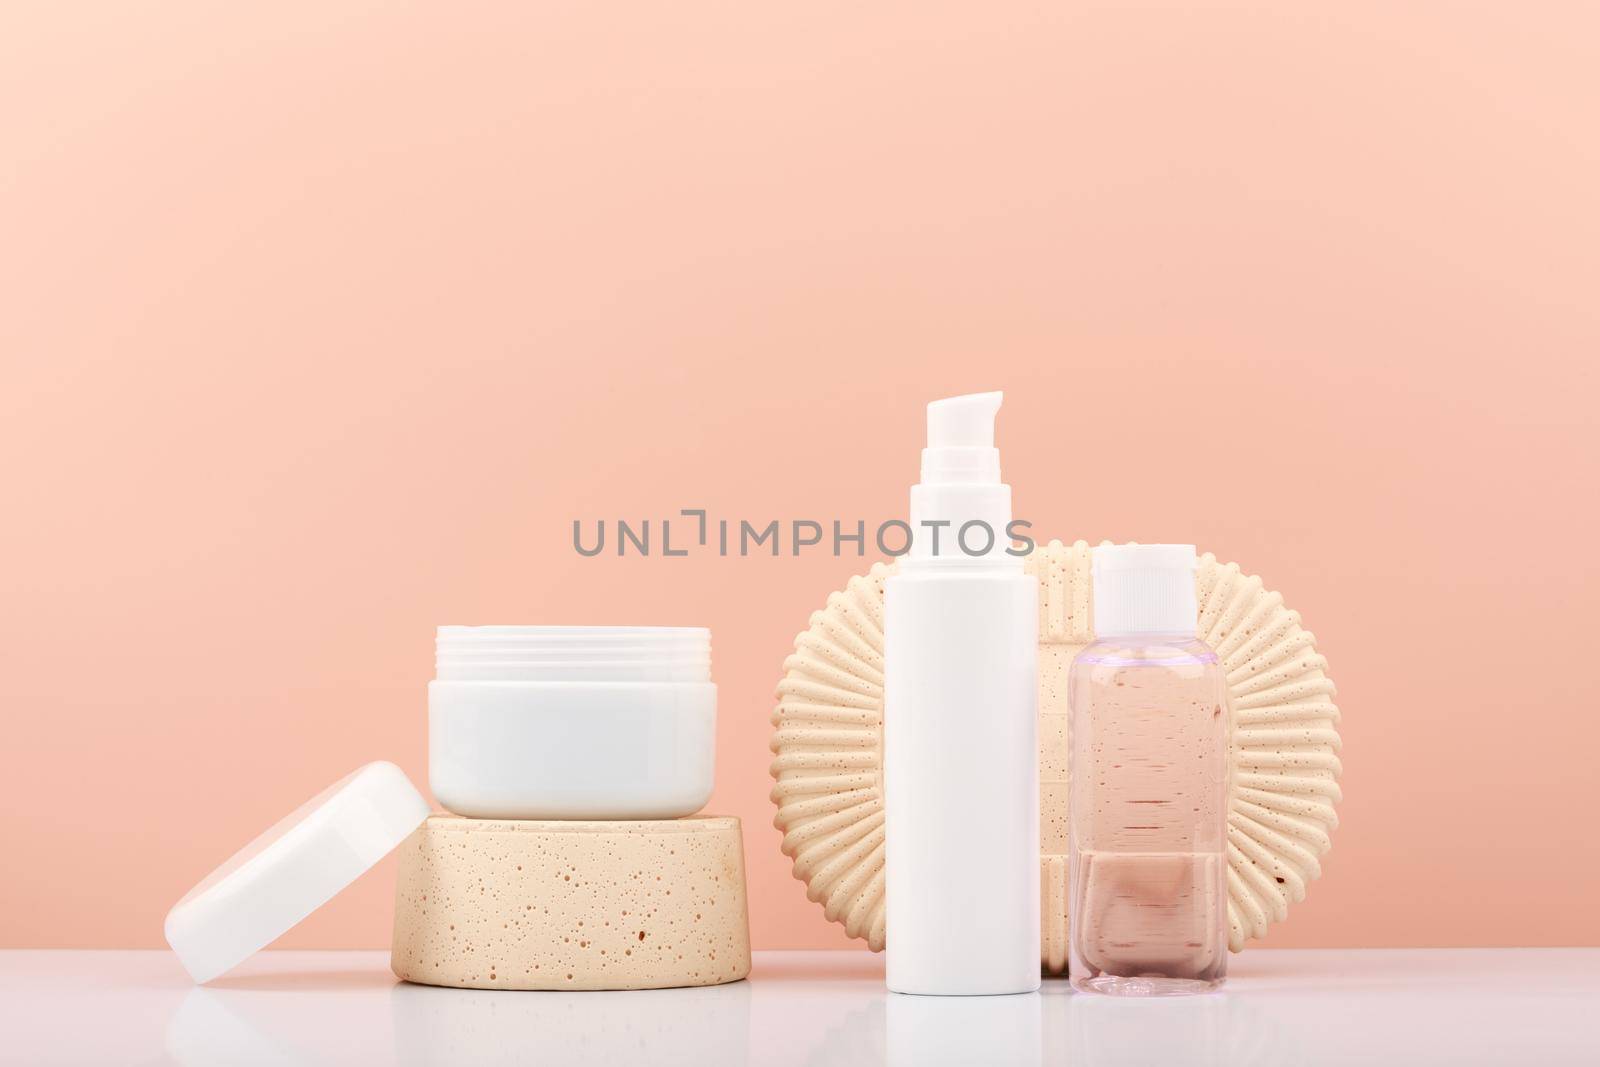 Set of skin care products on gypsum shapes on white table against bright beige background with copy space by Senorina_Irina